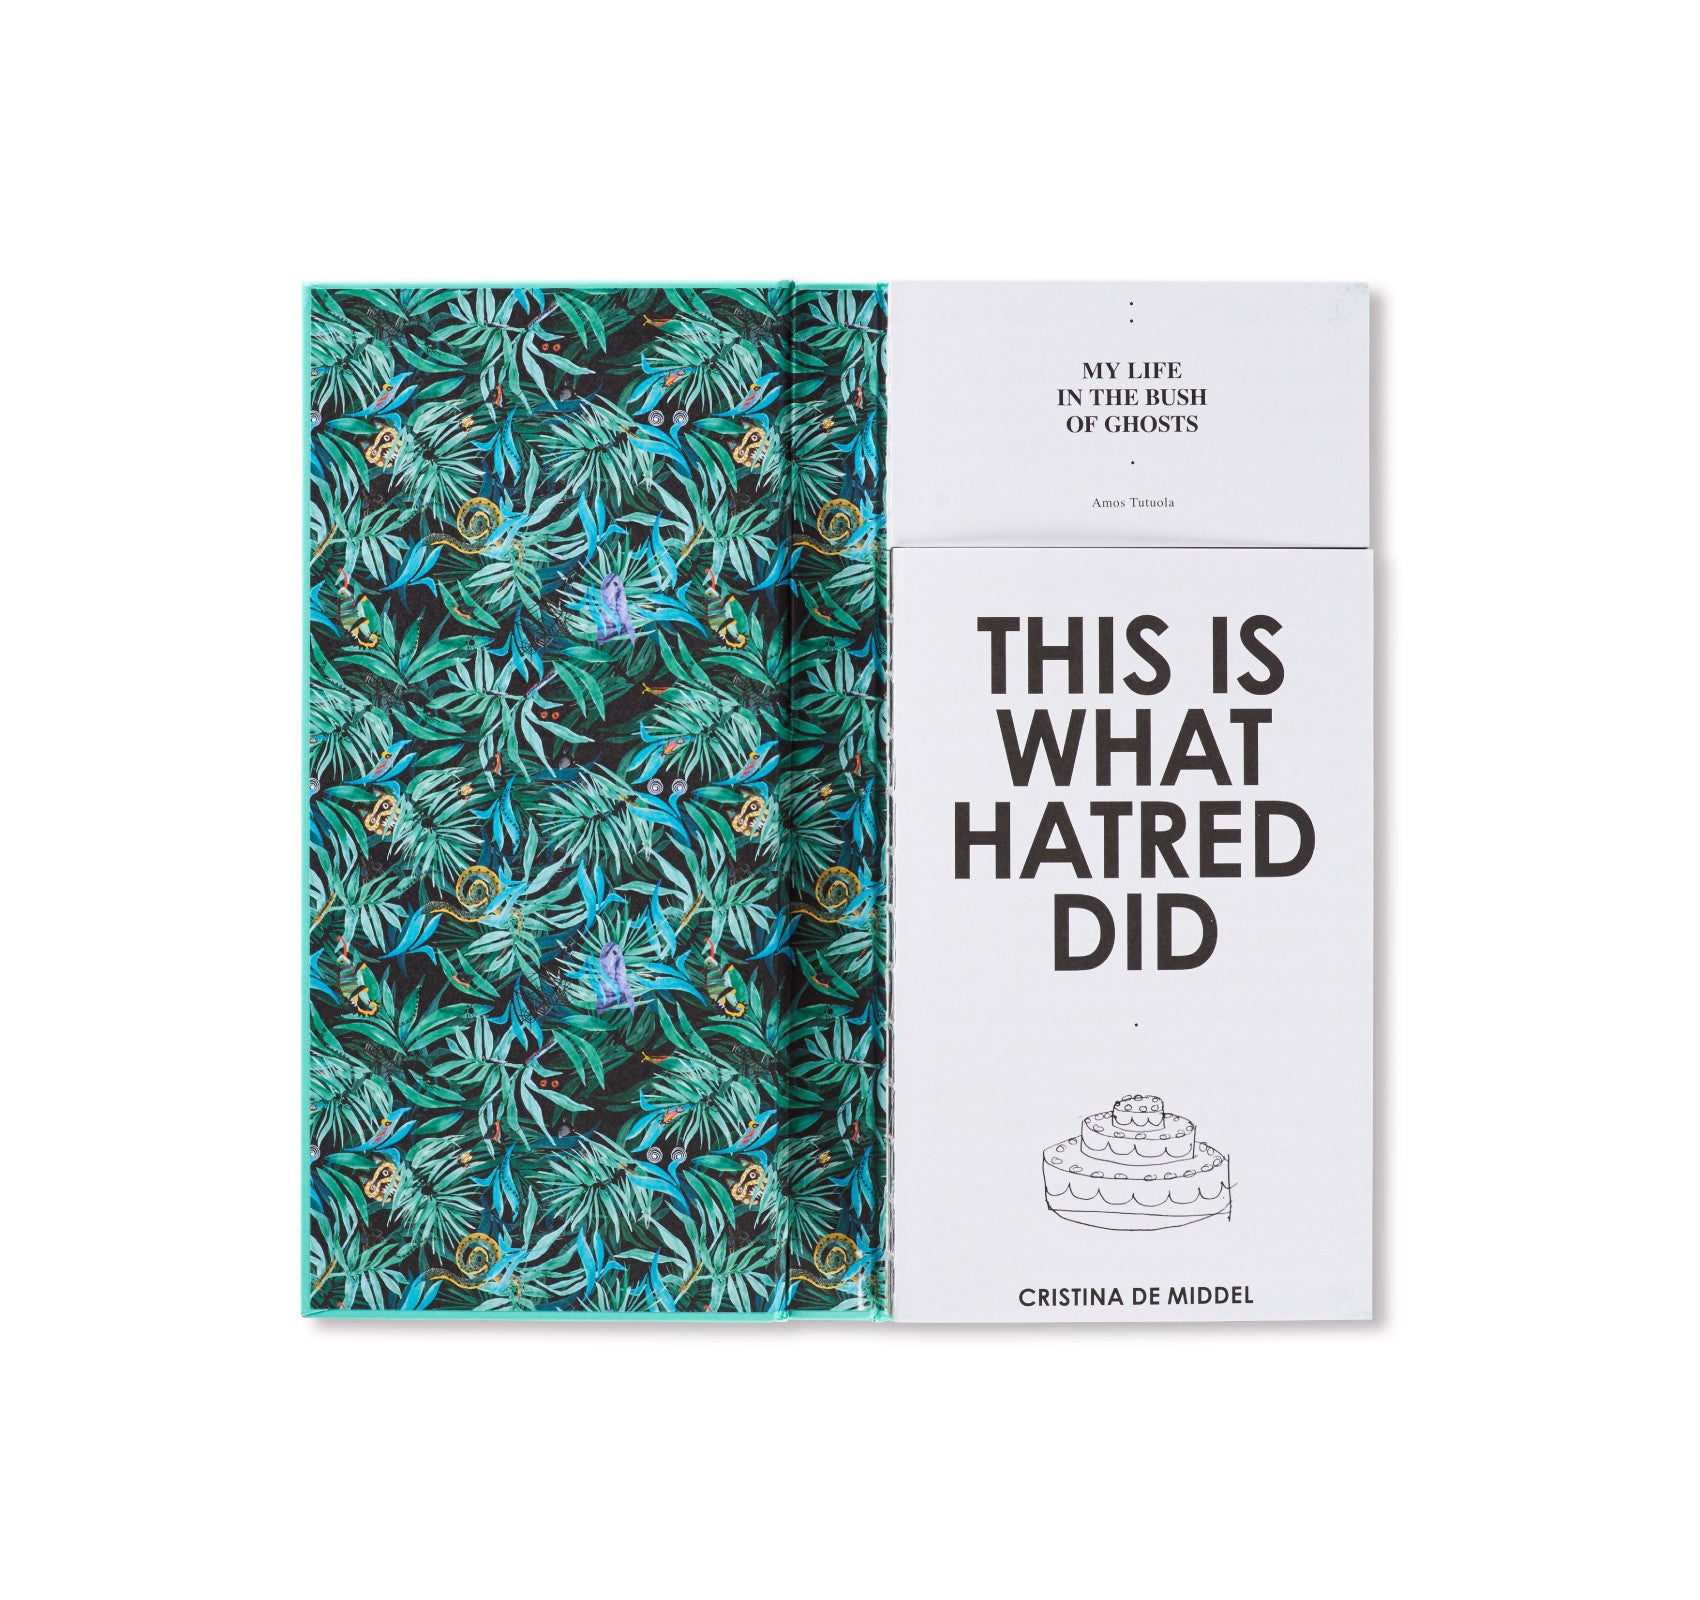 THIS IS WHAT HATRED DID by Cristina de Middel